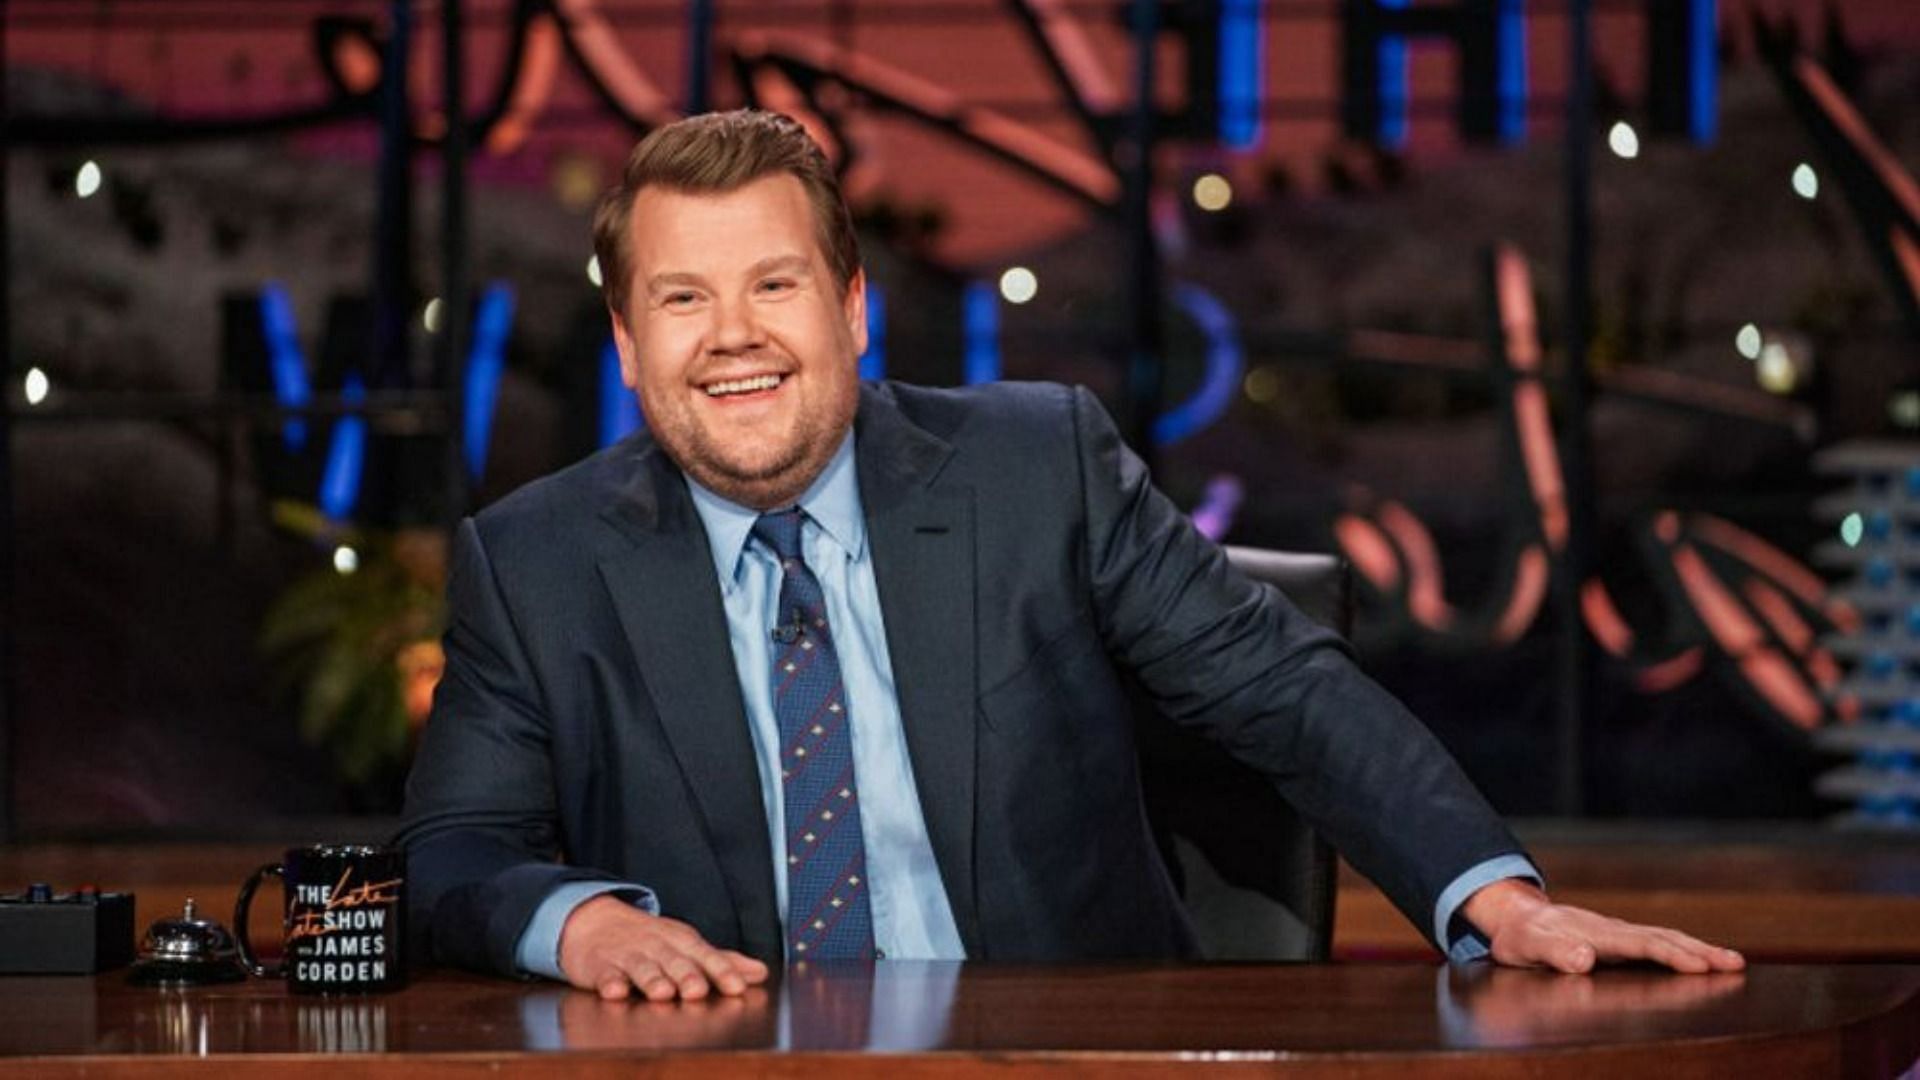 James Corden will quit The Late Late Show after the next season (Image via The Late Late Show/YouTube)